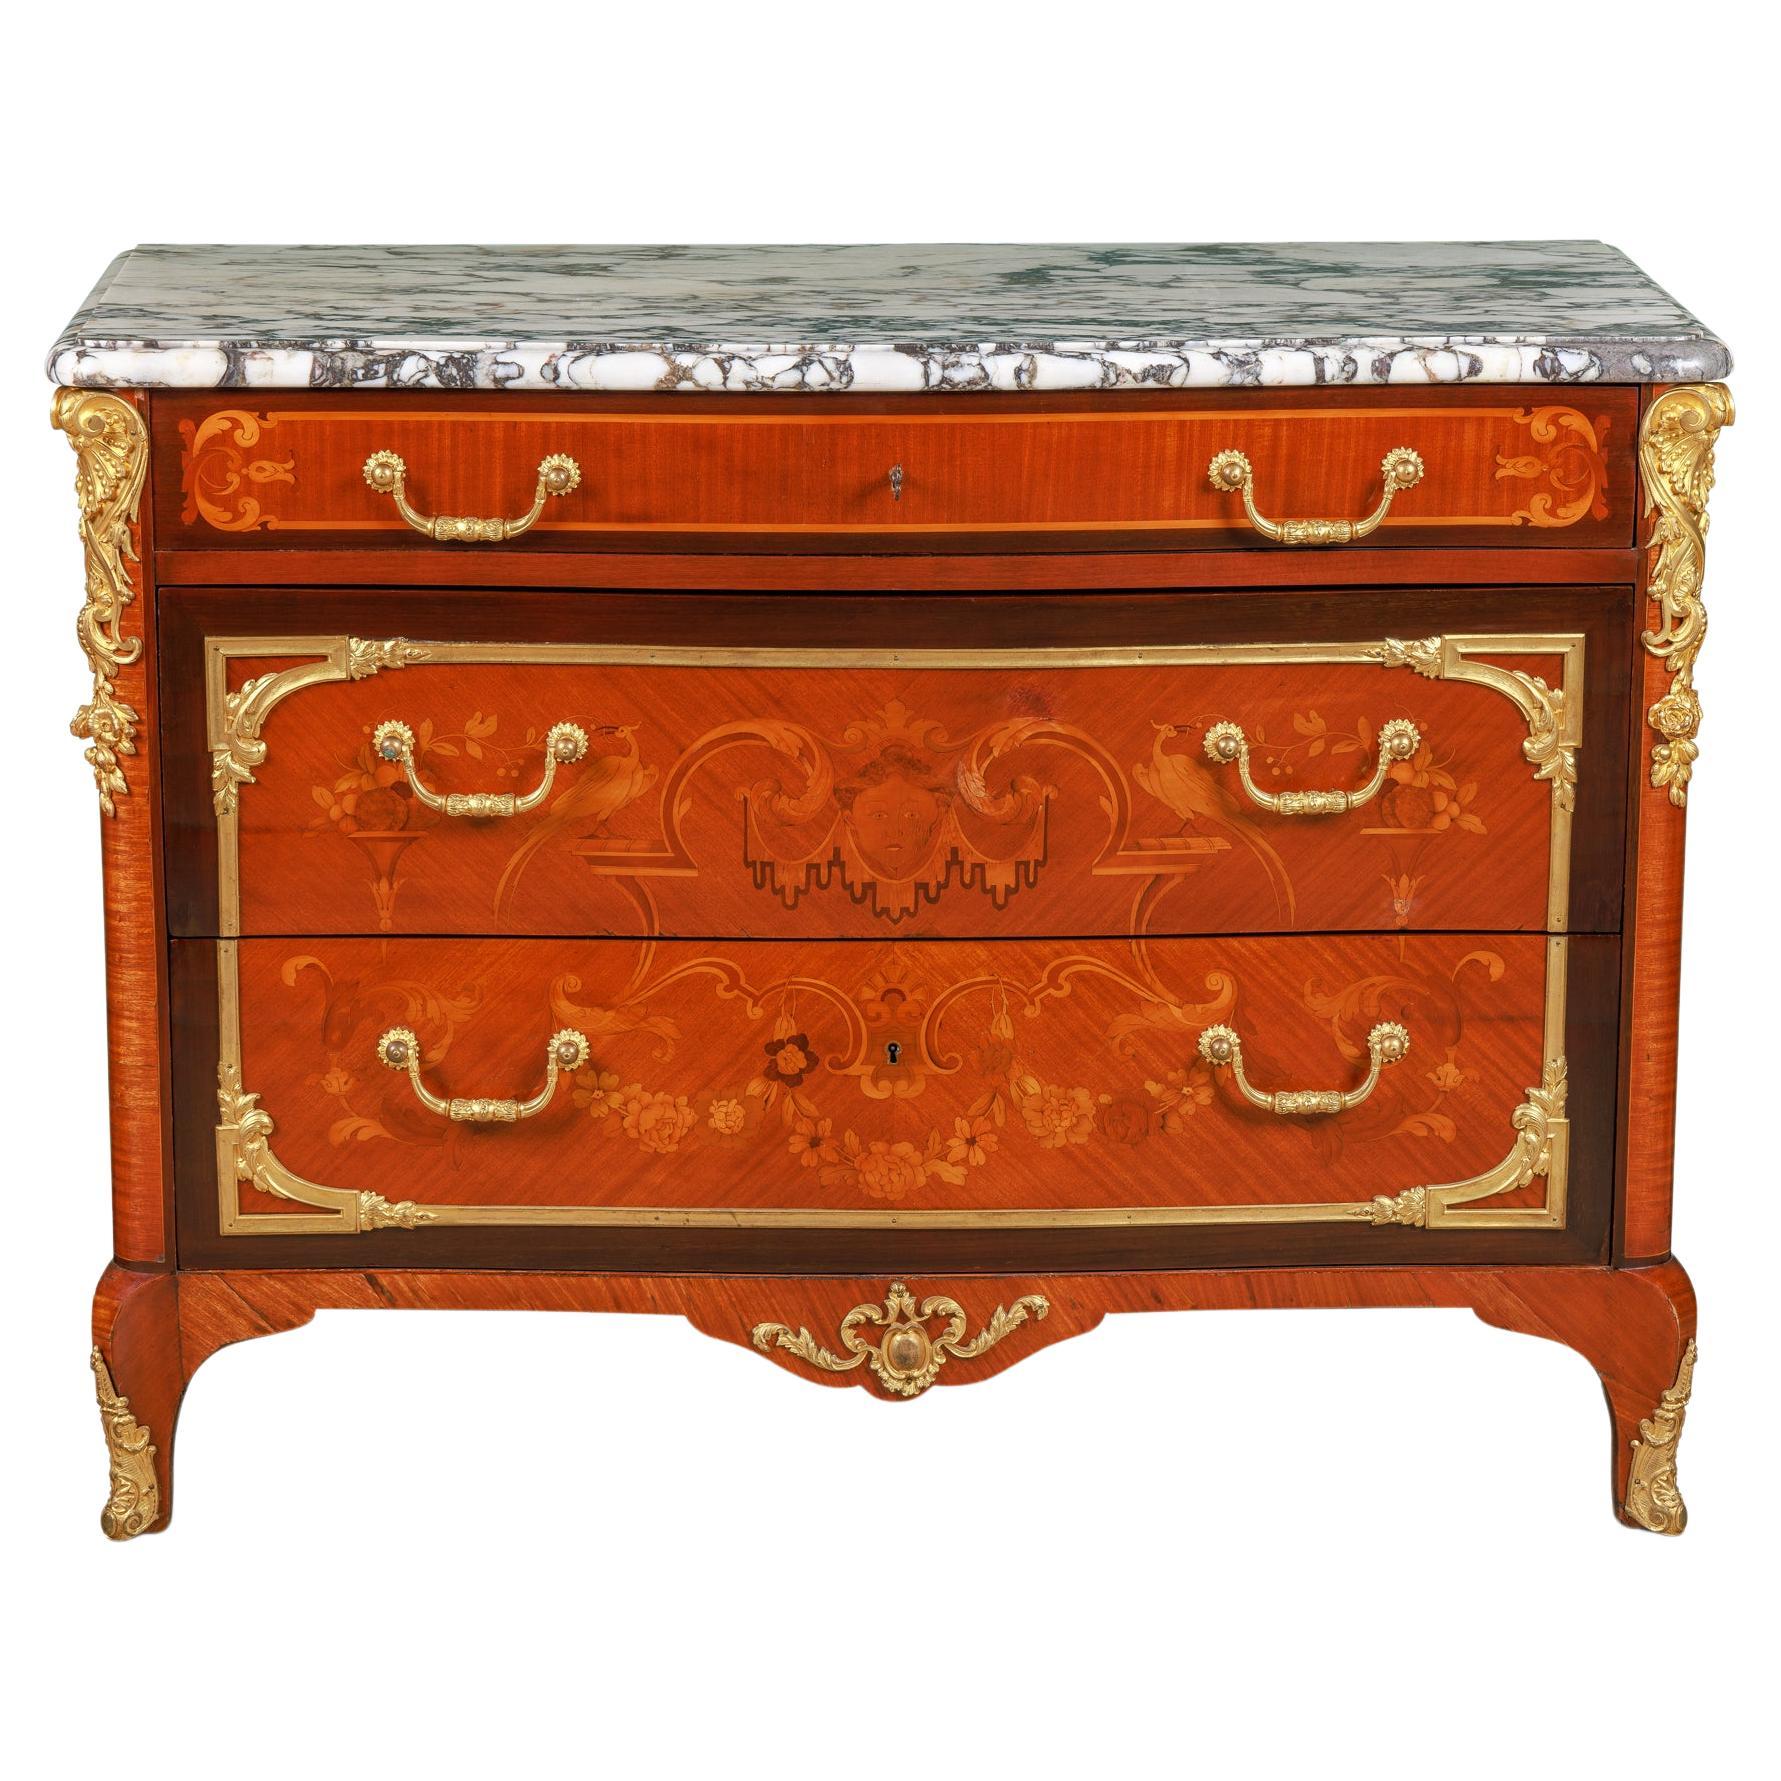 Exquisite French Ormolu-Mounted Mahogany Parquetry Marble-Top Commode C. 1870 For Sale